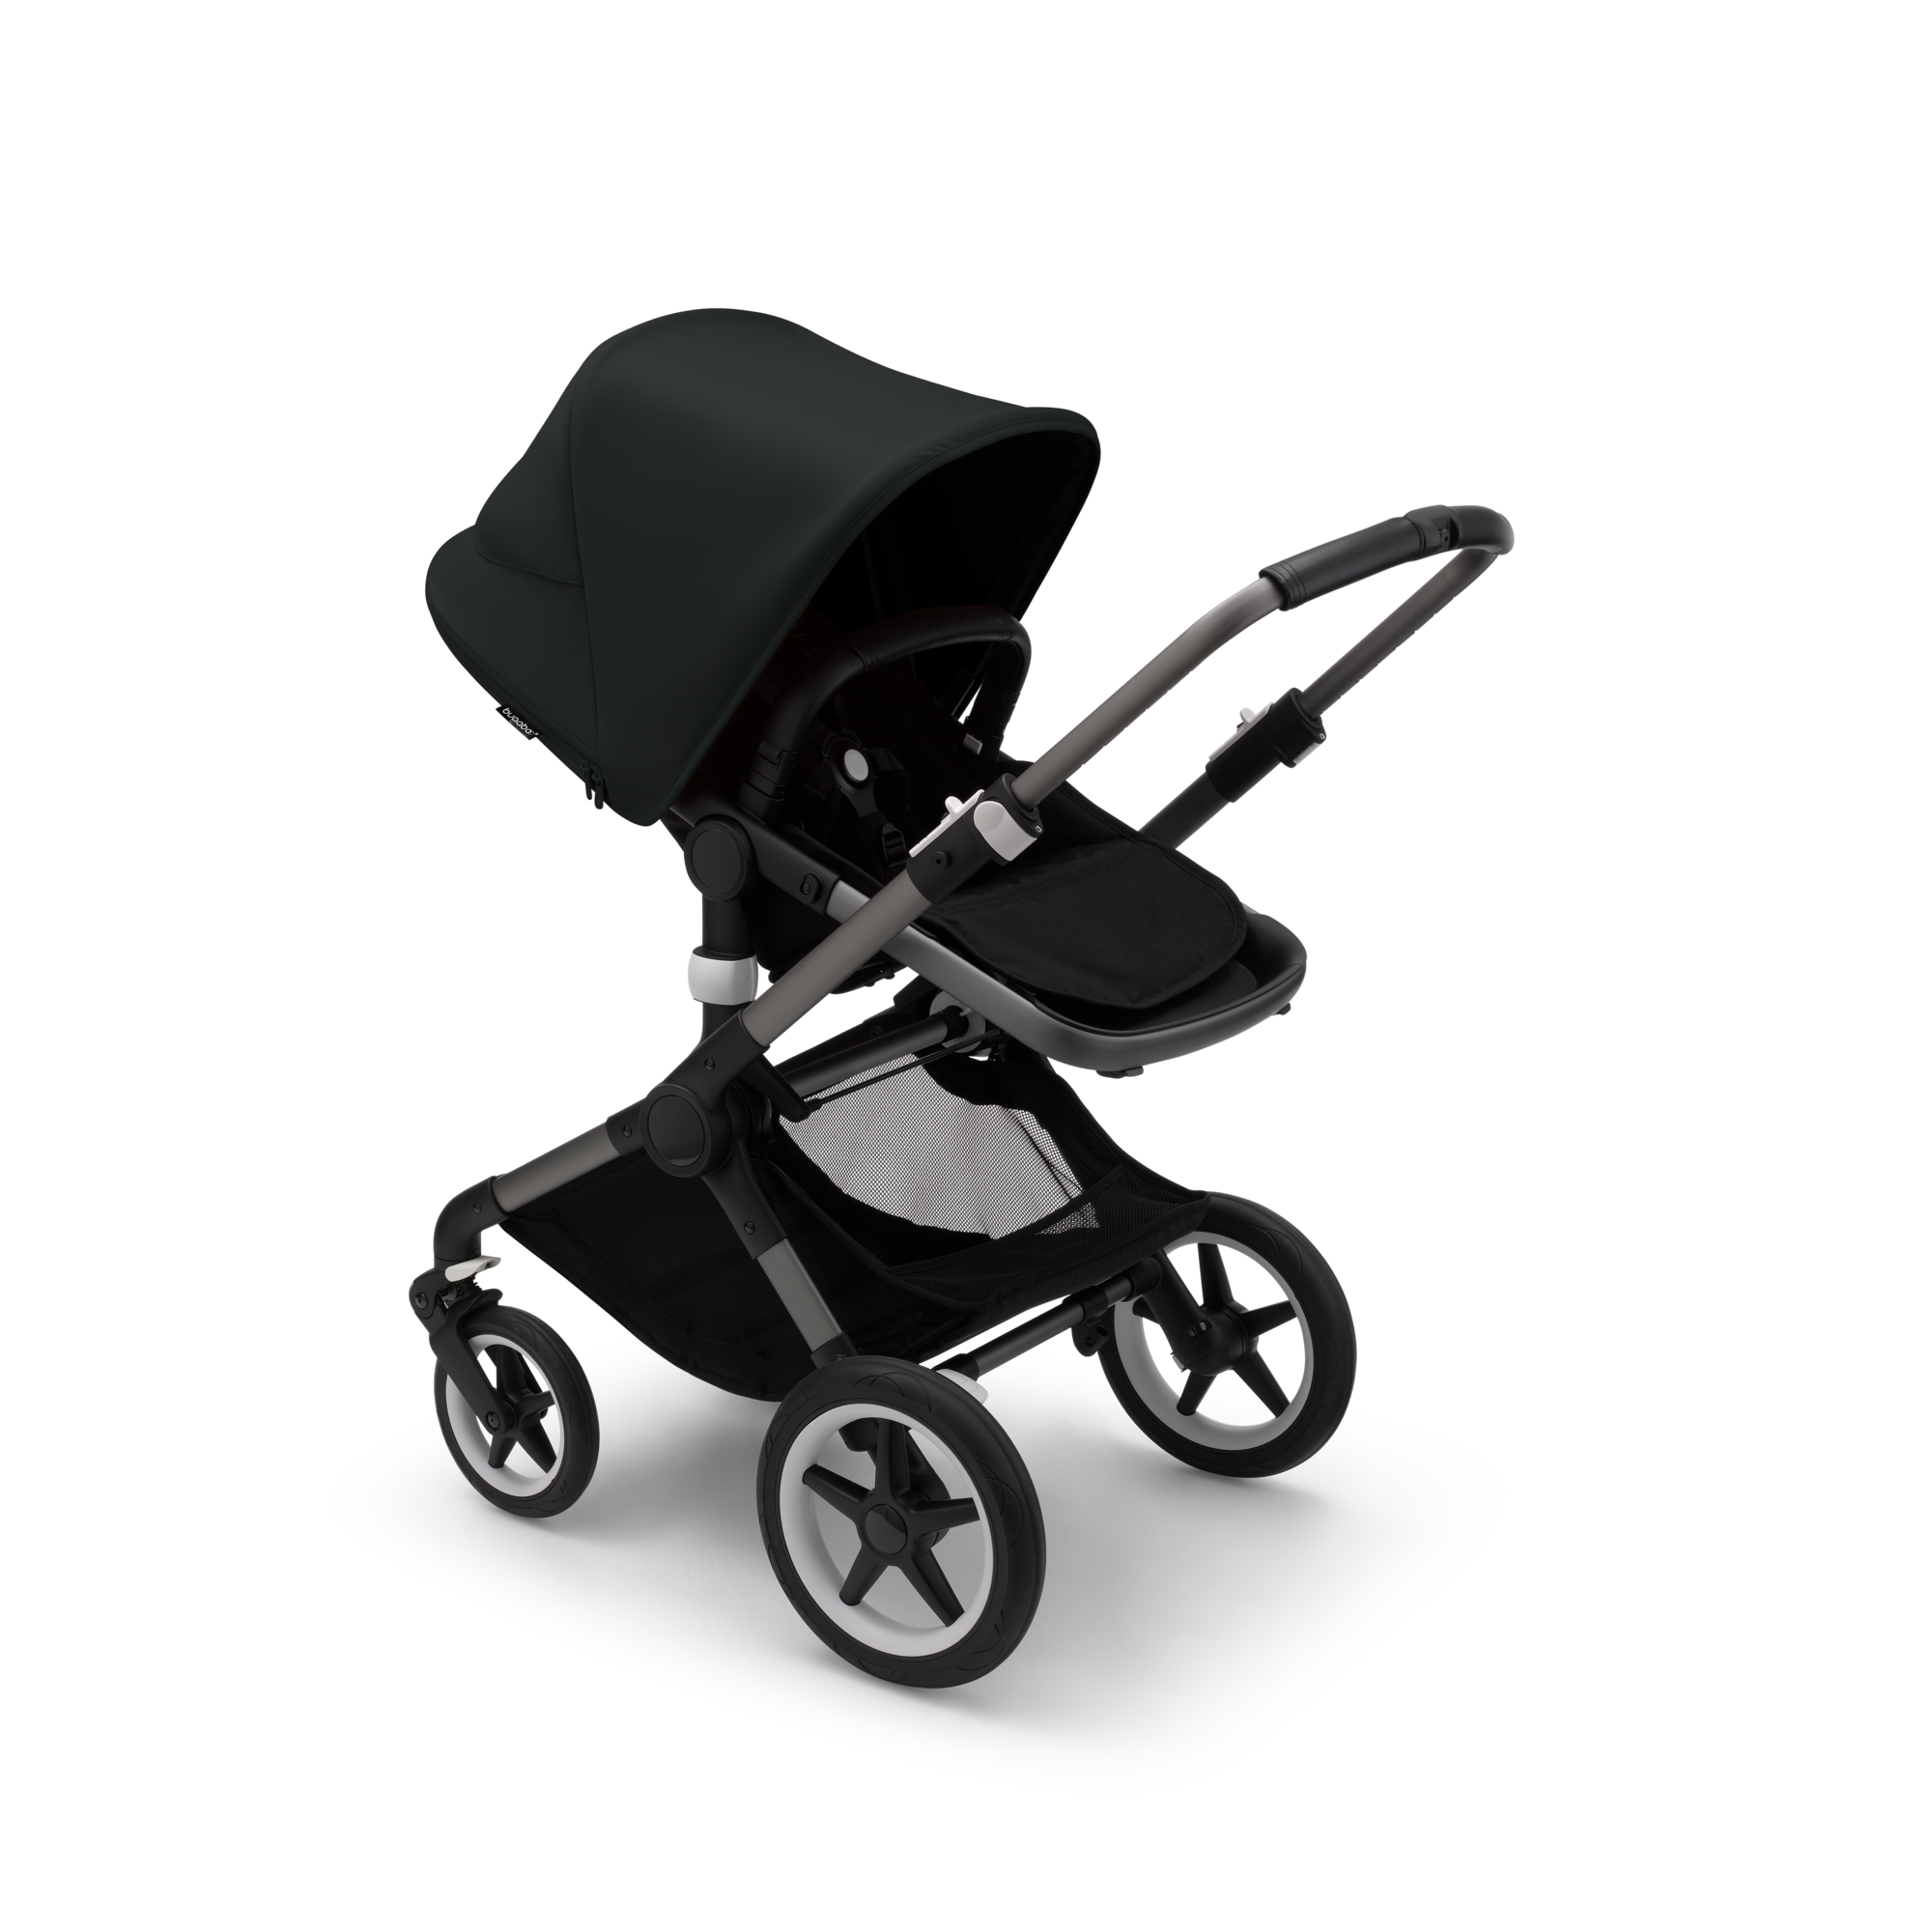 Fox 3 bassinet and seat stroller Midnight black canopy, black fabrics, graphite chassis |